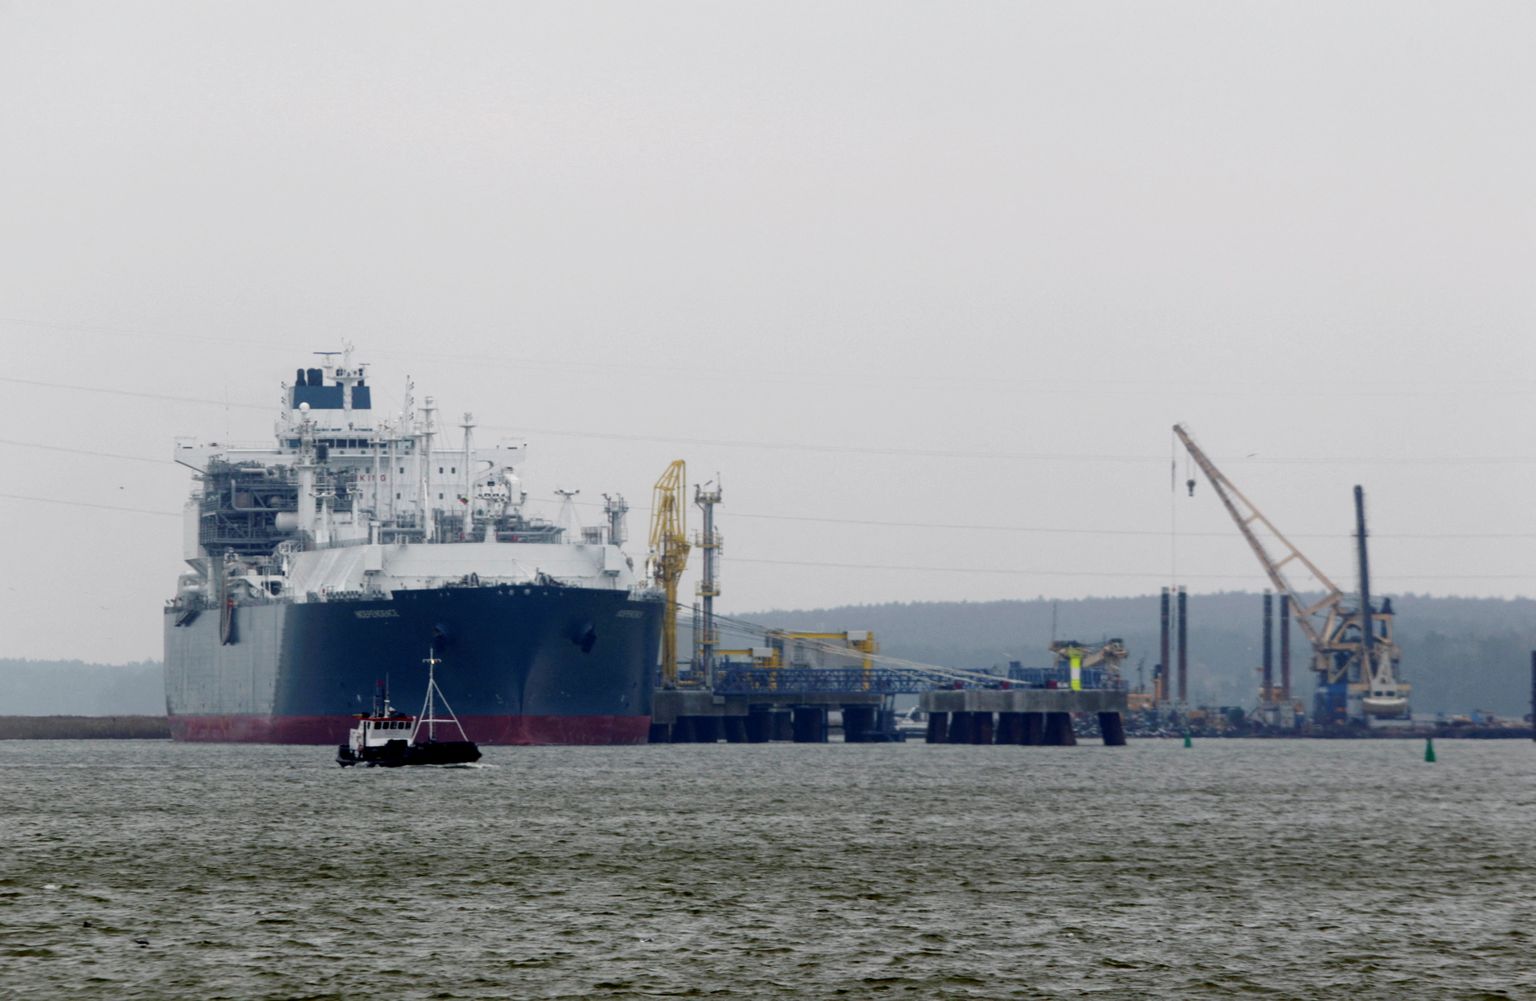 Floating storage regasification unit (FSRU) «Independence» is docked at the liquefied natural gas (LNG) terminal in Klaipeda port.